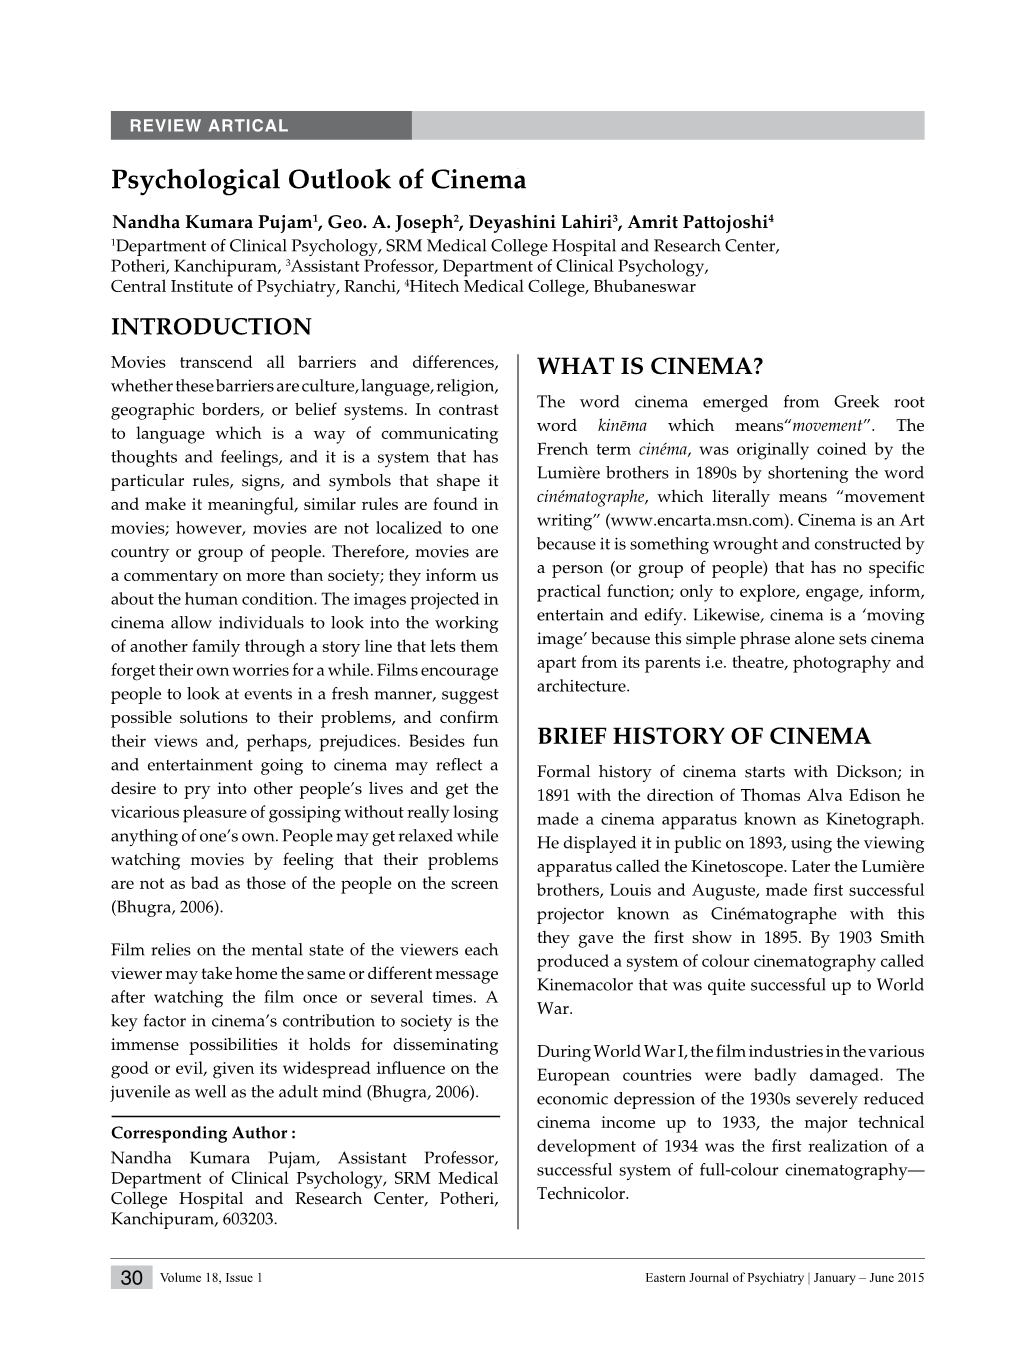 Psychological Outlook of Cinema Review Artical